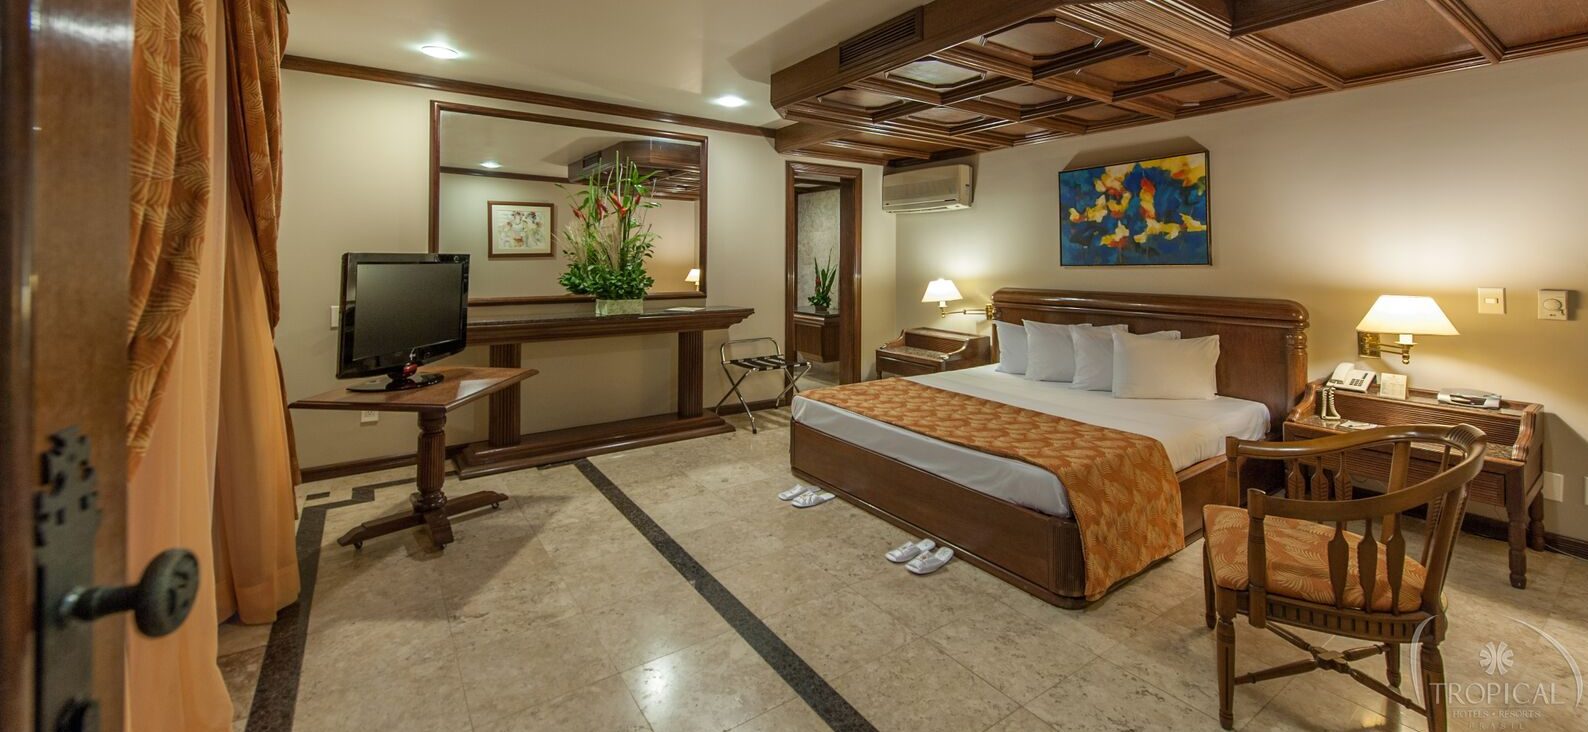 Large classic room in the tropical Manaus eco-resort. 